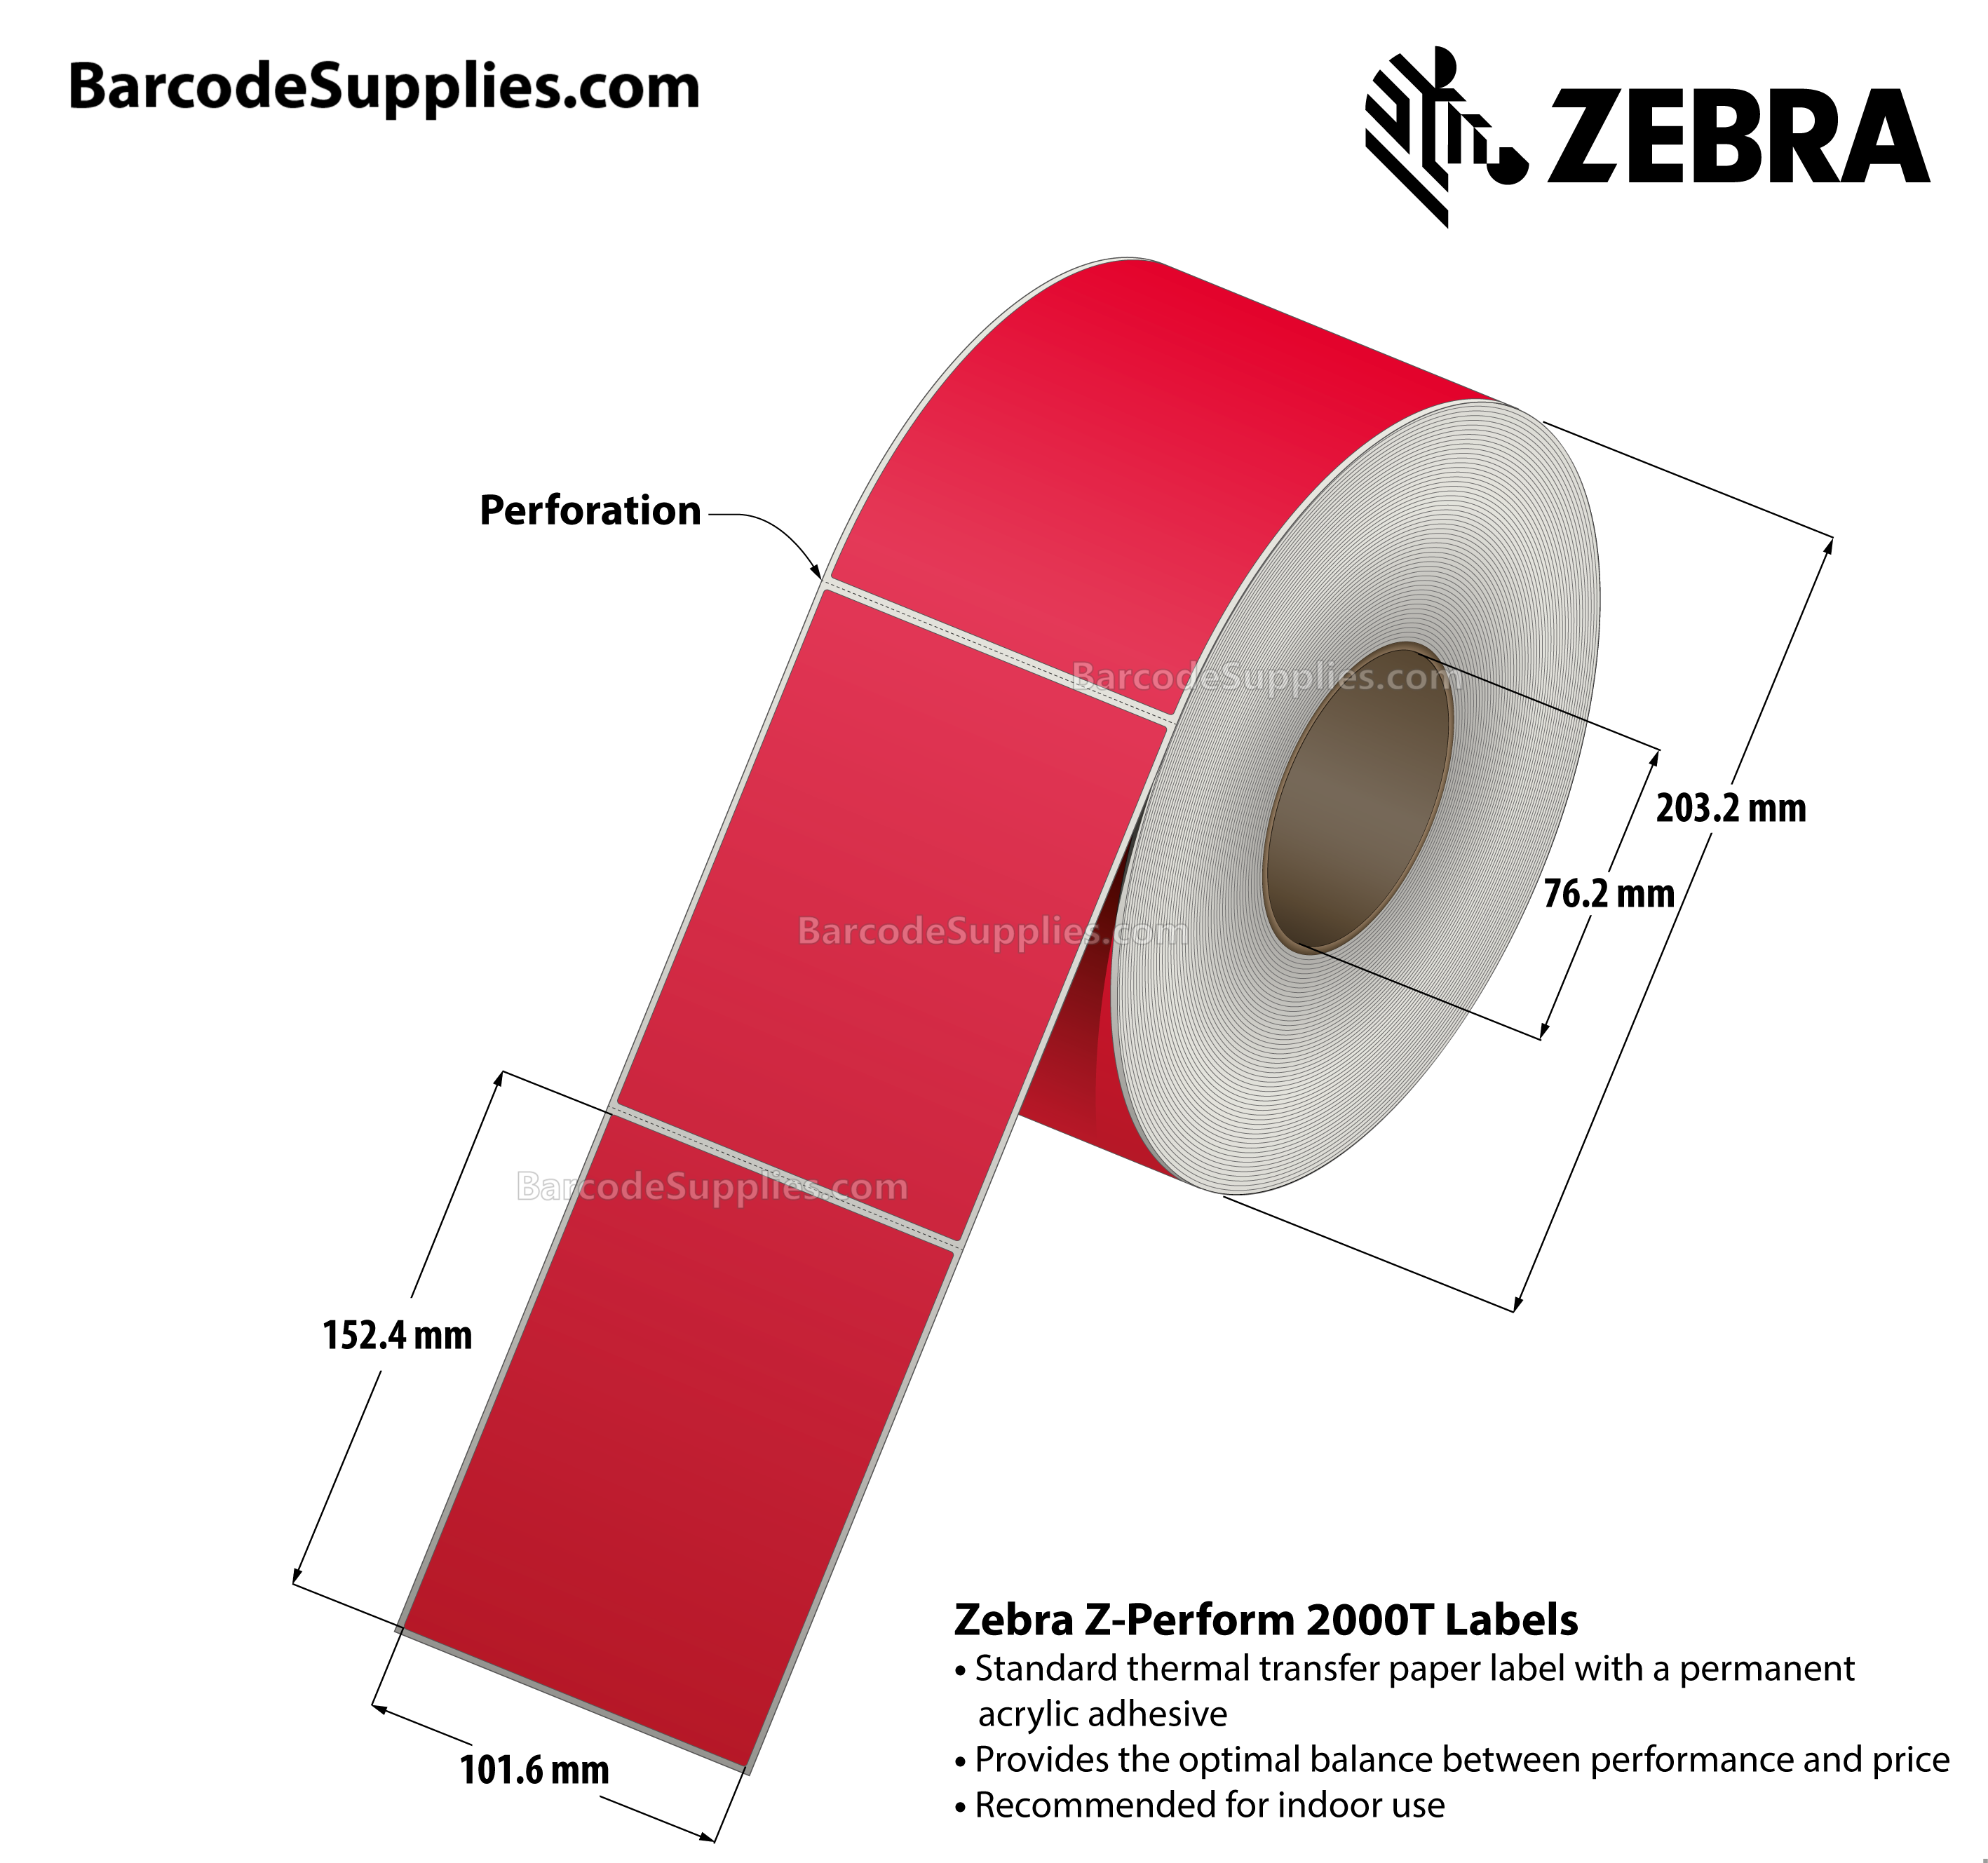 4 x 6 Thermal Transfer Red - PMS 185 Z-Perform 2000T Floodcoated (Red) Labels With Permanent Adhesive - Perforated - 1000 Labels Per Roll - Carton Of 4 Rolls - 4000 Labels Total - MPN: 10006208-5